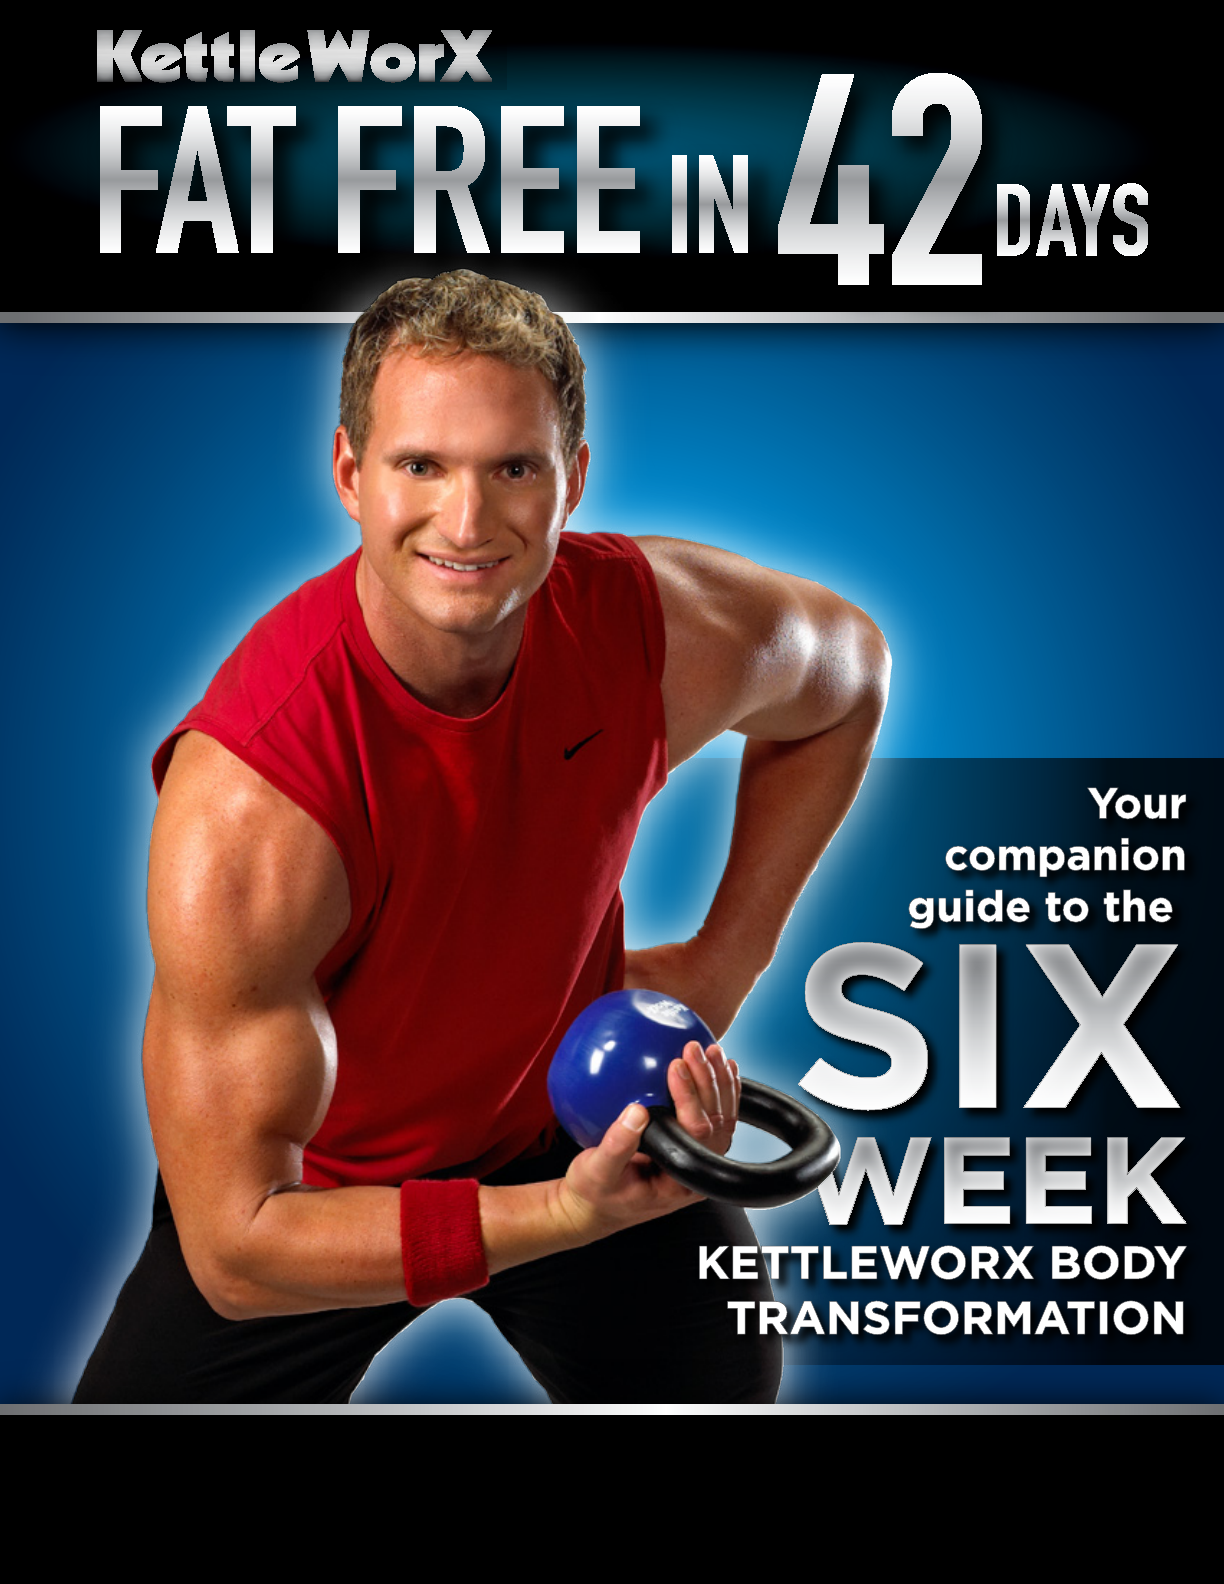 Kettleworx ultimate body collection pdf file